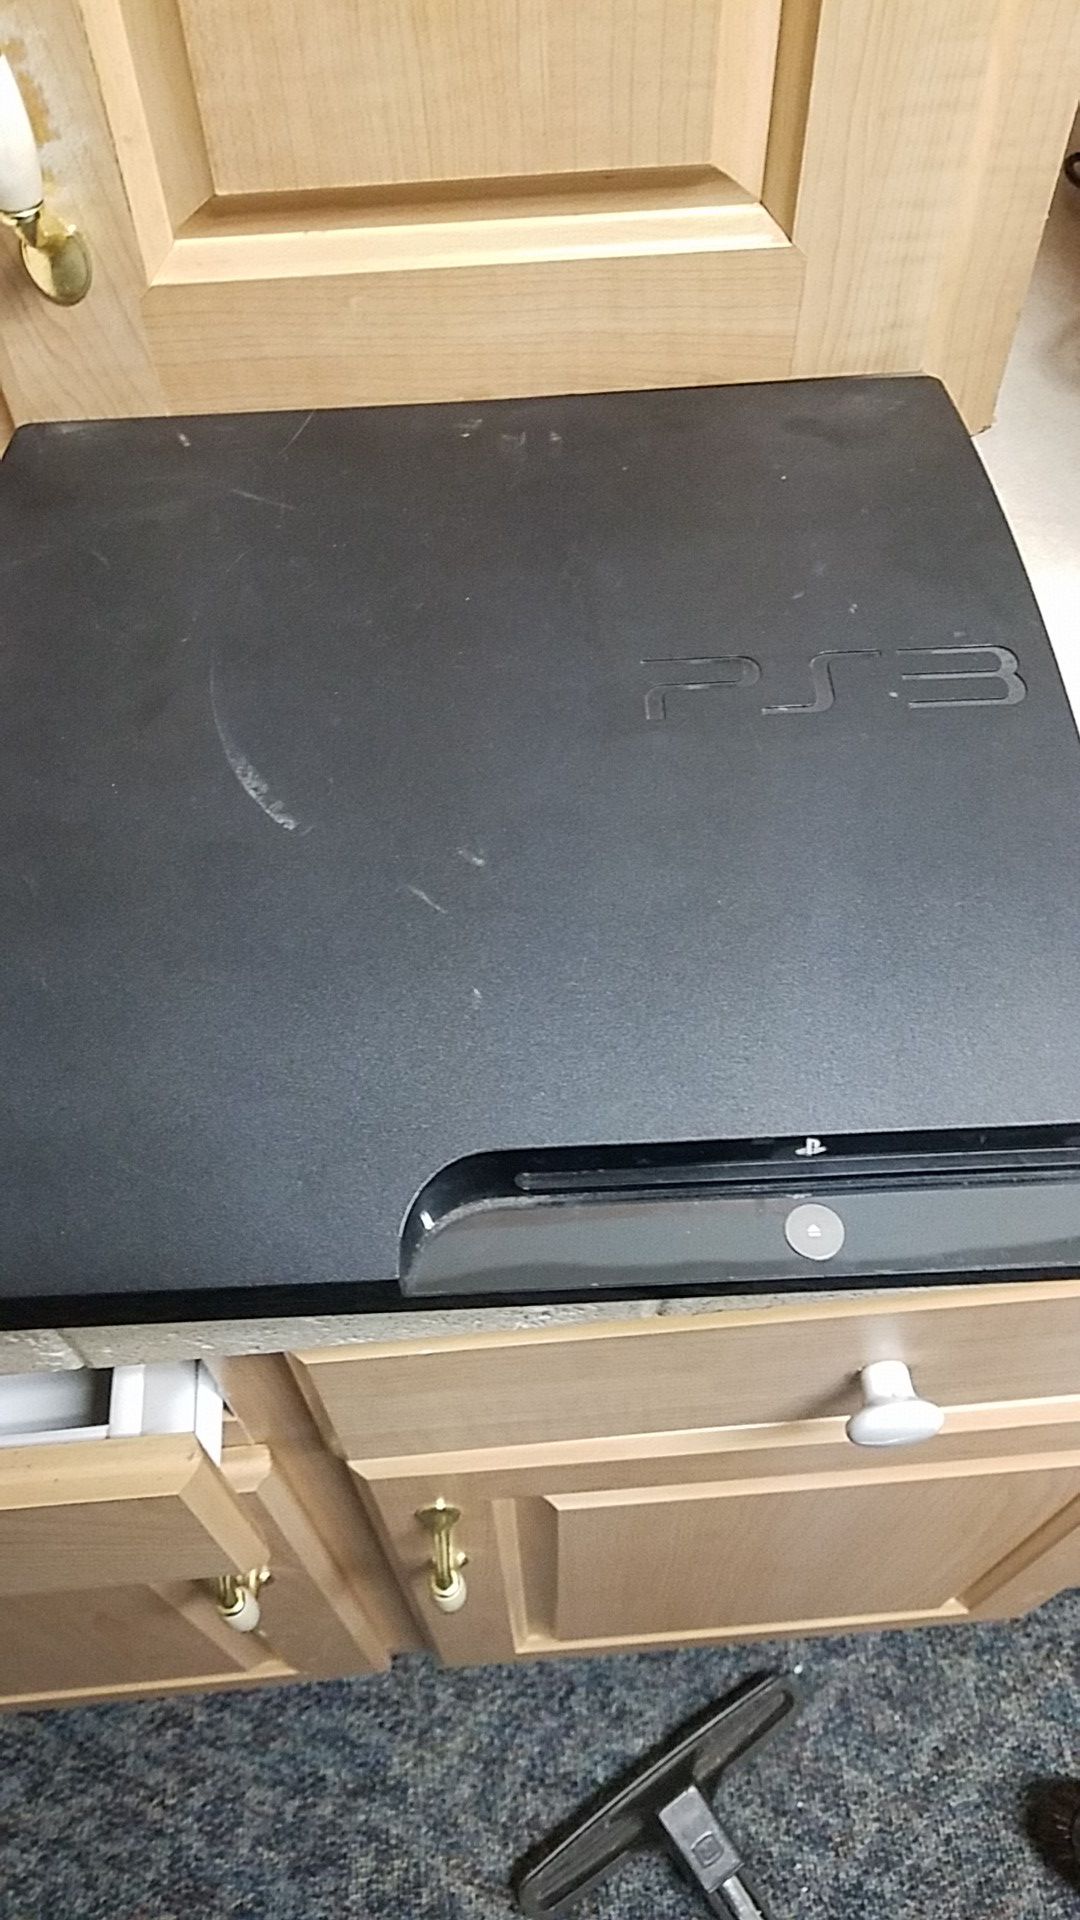 PS3 FOR PARTS 500 GB